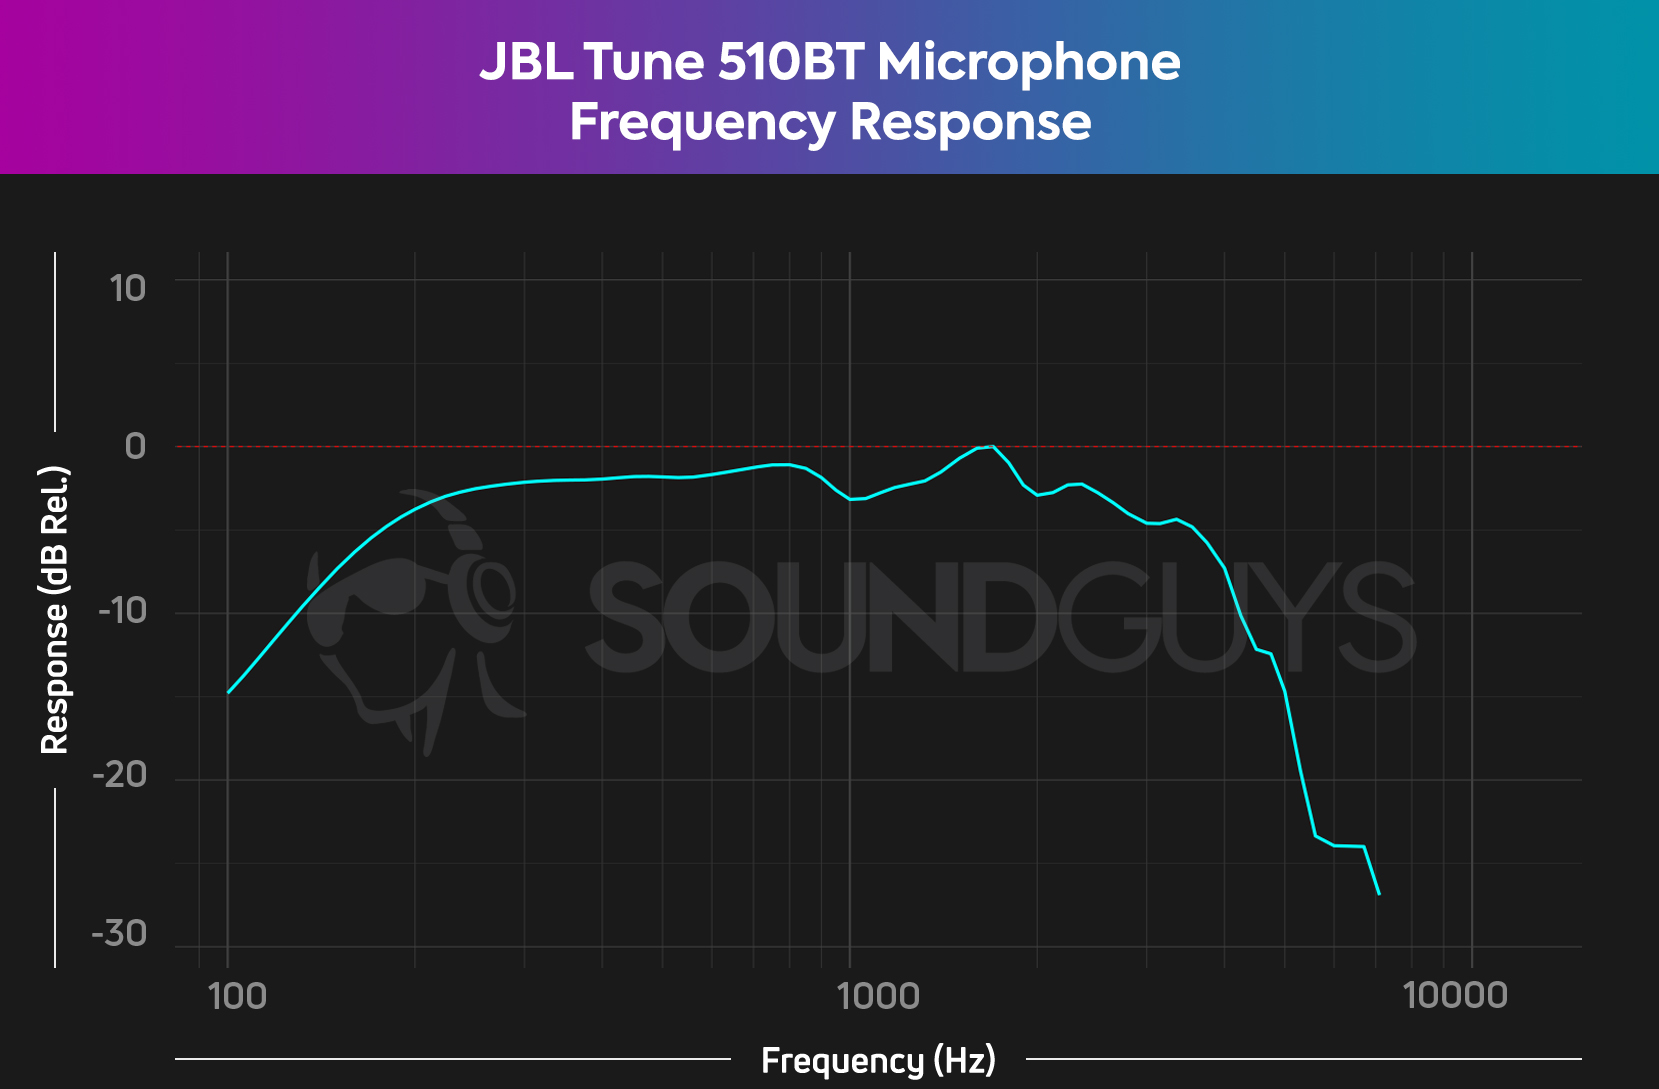 The microphone frequency response chart for the JBL Tune 510BT.